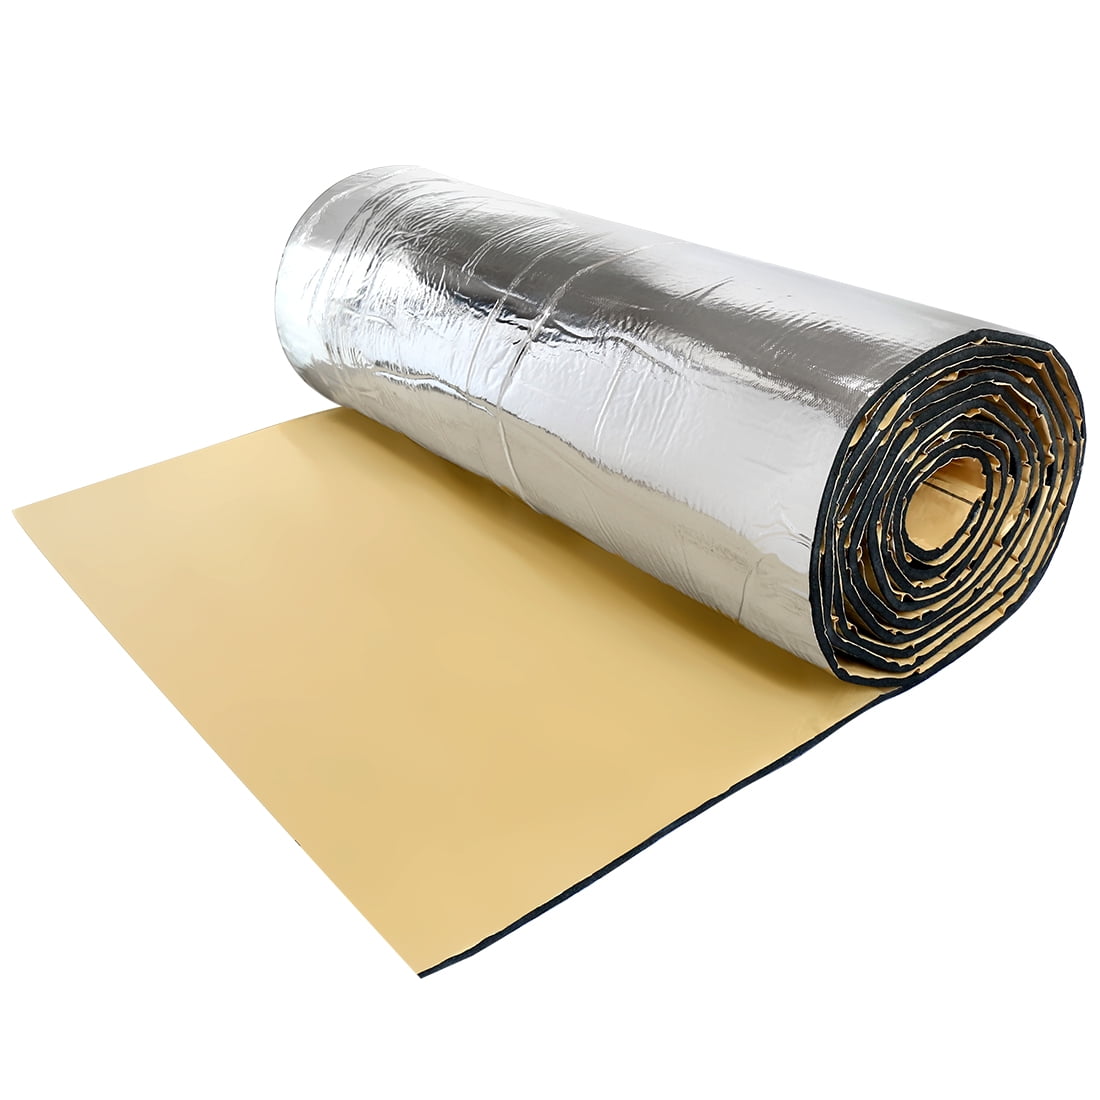 Roof thermal insulation cotton,Car Heat Insulation Pad,Heat Sound Deadening Insulation  Mat,Heat Insulation Material,Aluminum Foil Finish,for  Floors,Walls,Lofts,Roofs ( Color : 20MM(THK) , Size : 1m² ) : :  DIY & Tools